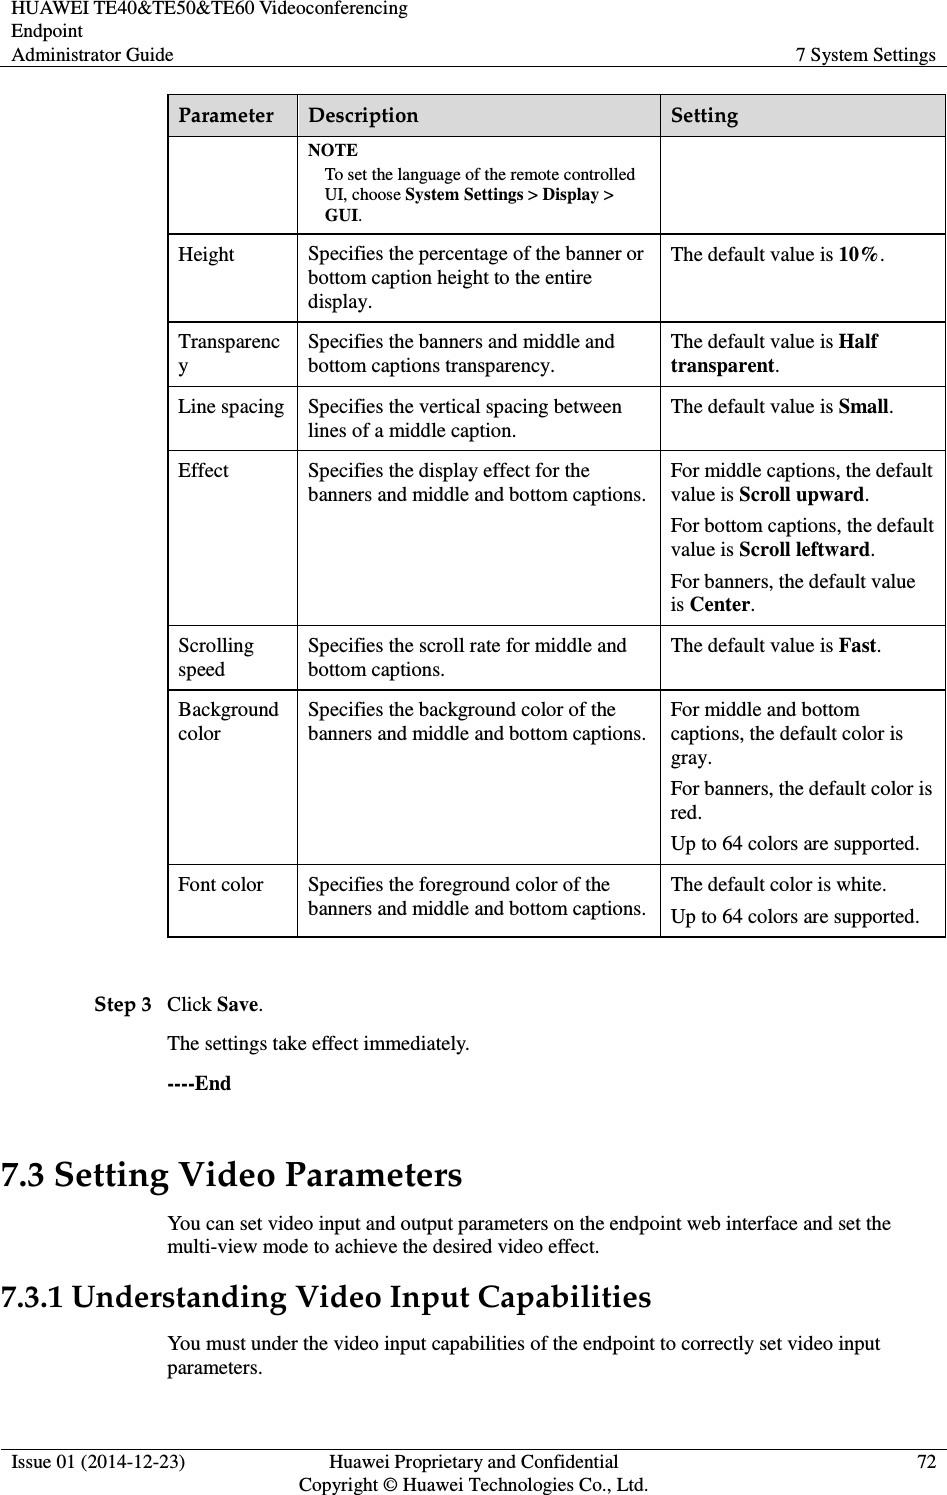 HUAWEI TE40&amp;TE50&amp;TE60 Videoconferencing Endpoint Administrator Guide  7 System Settings  Issue 01 (2014-12-23)  Huawei Proprietary and Confidential                                     Copyright © Huawei Technologies Co., Ltd. 72  Parameter  Description  Setting NOTE To set the language of the remote controlled UI, choose System Settings &gt; Display &gt; GUI. Height  Specifies the percentage of the banner or bottom caption height to the entire display. The default value is 10%. Transparency Specifies the banners and middle and bottom captions transparency. The default value is Half transparent.   Line spacing  Specifies the vertical spacing between lines of a middle caption. The default value is Small. Effect  Specifies the display effect for the banners and middle and bottom captions. For middle captions, the default value is Scroll upward. For bottom captions, the default value is Scroll leftward. For banners, the default value is Center.   Scrolling speed Specifies the scroll rate for middle and bottom captions. The default value is Fast.   Background color Specifies the background color of the banners and middle and bottom captions. For middle and bottom captions, the default color is gray. For banners, the default color is red.   Up to 64 colors are supported. Font color  Specifies the foreground color of the banners and middle and bottom captions.  The default color is white. Up to 64 colors are supported.  Step 3 Click Save. The settings take effect immediately.   ----End 7.3 Setting Video Parameters You can set video input and output parameters on the endpoint web interface and set the multi-view mode to achieve the desired video effect. 7.3.1 Understanding Video Input Capabilities You must under the video input capabilities of the endpoint to correctly set video input parameters. 